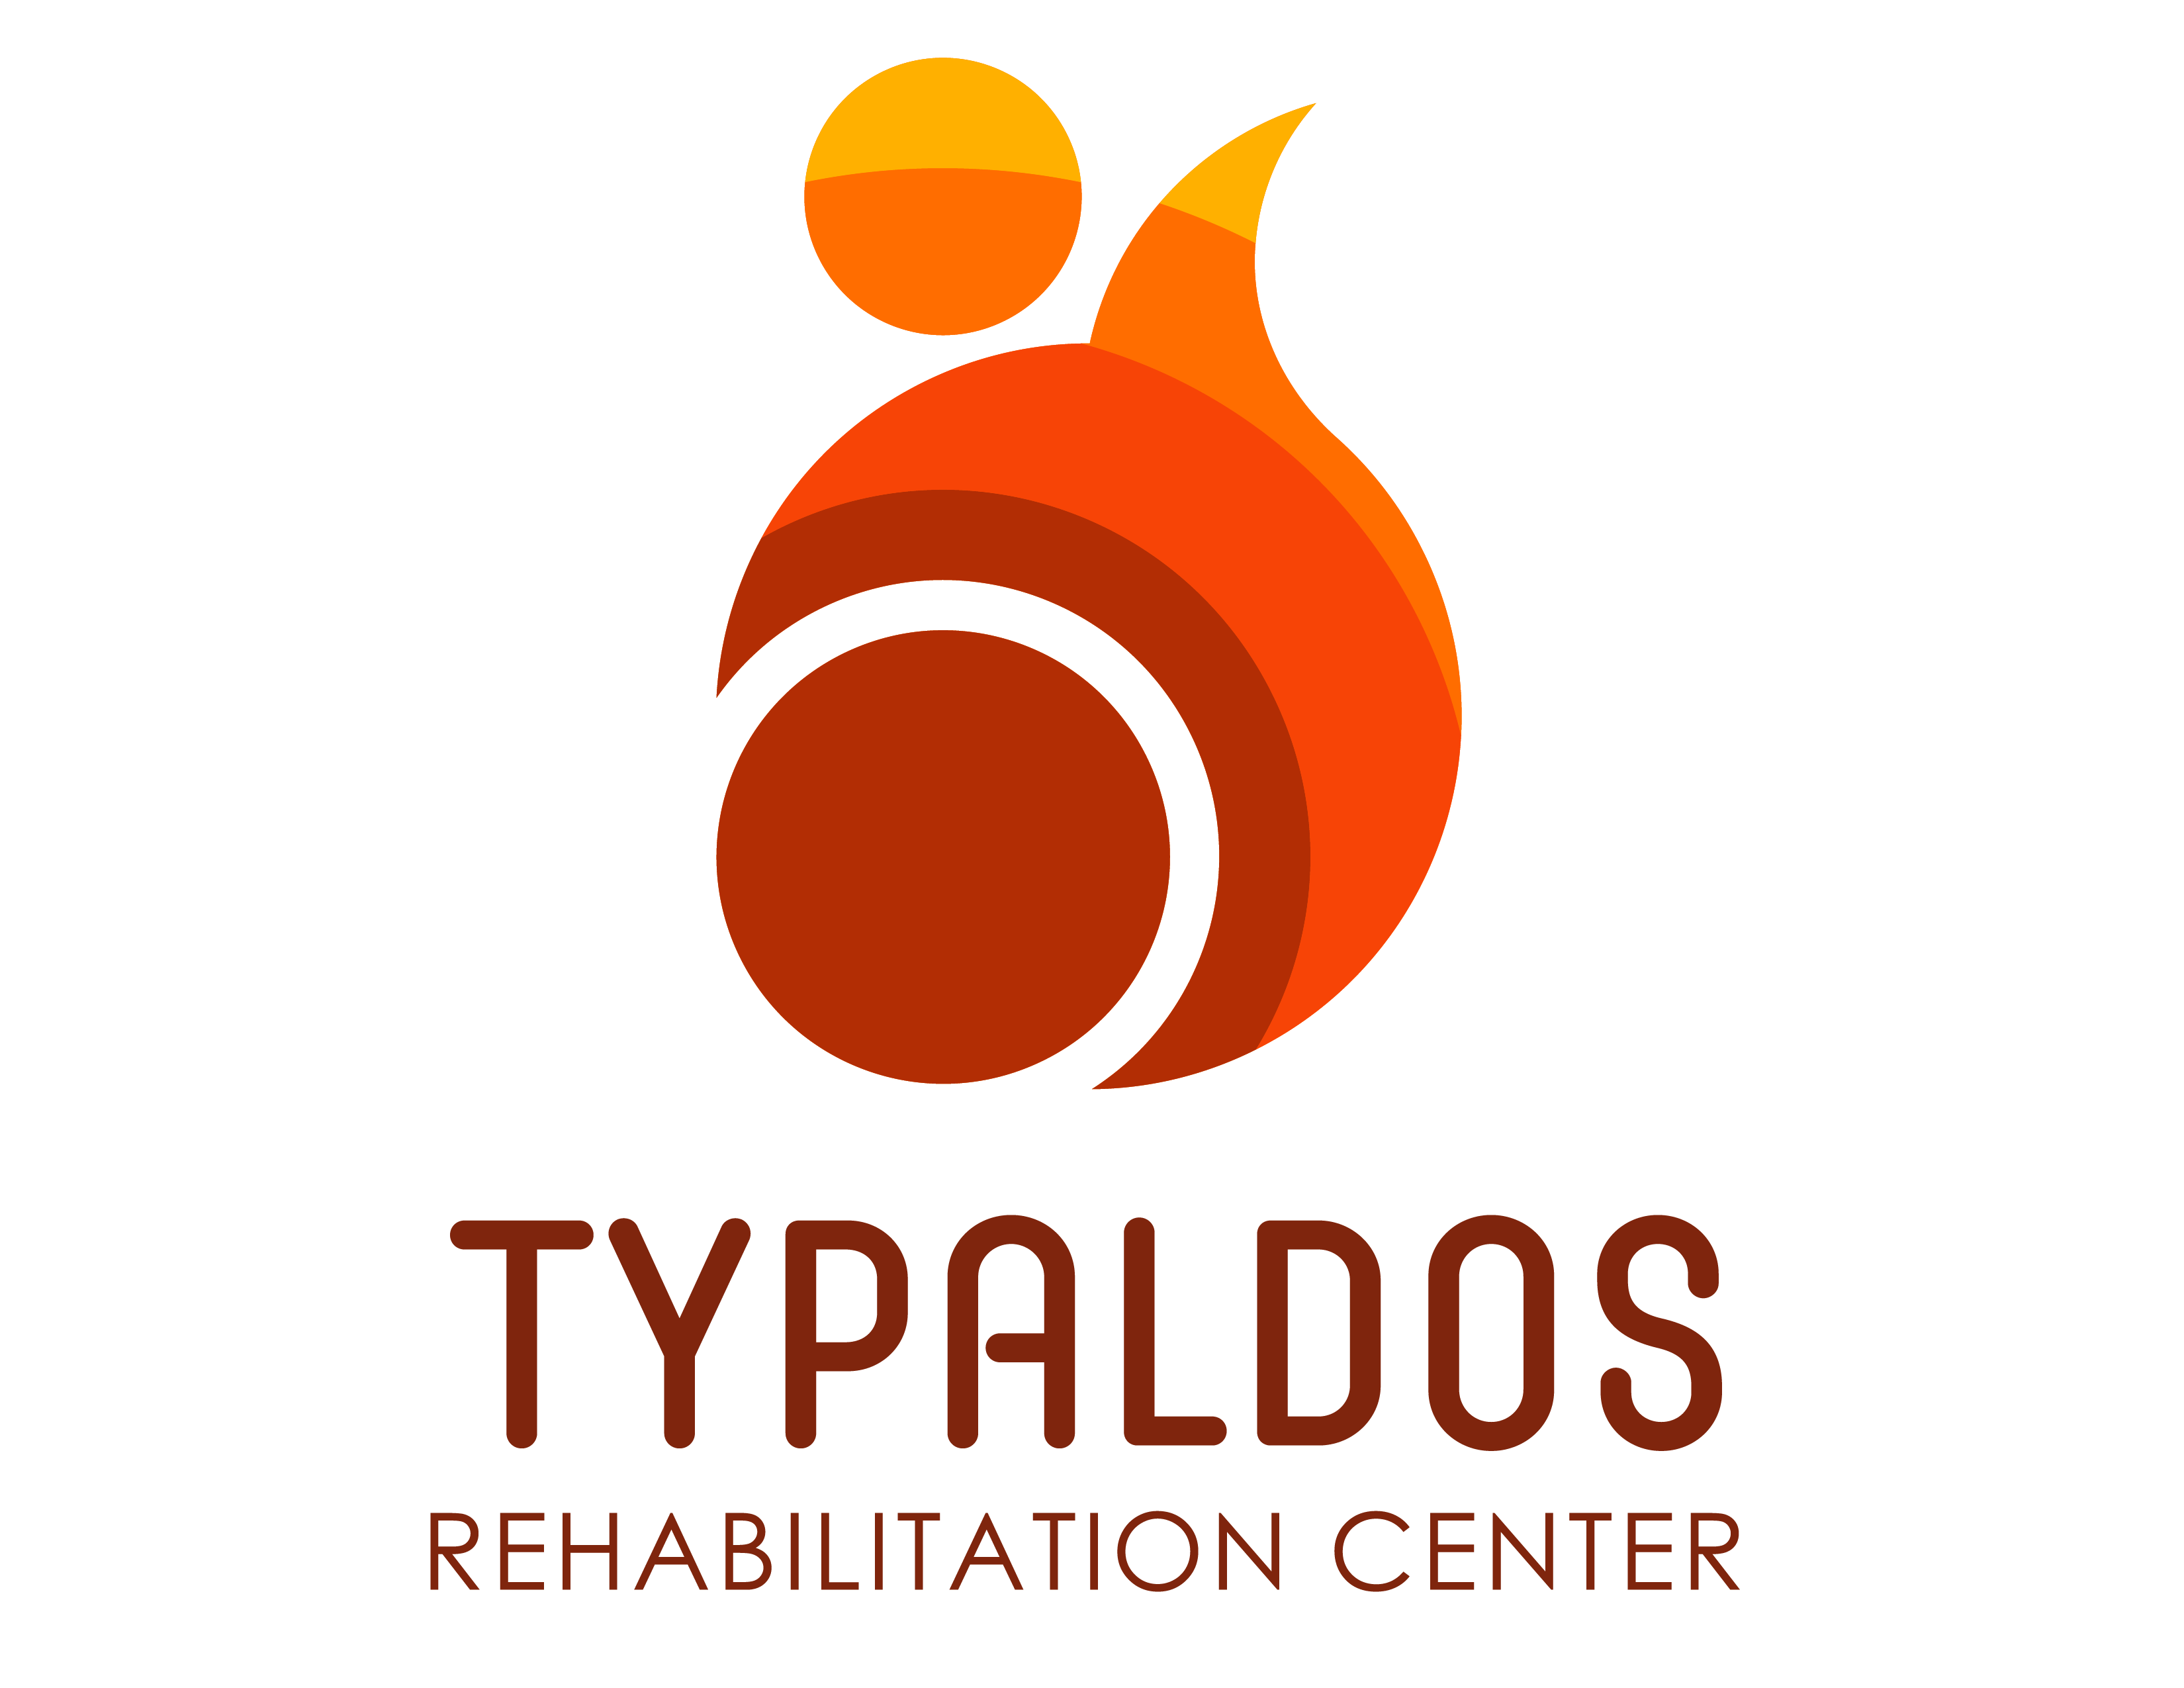 Typaldos Physical Therapy Center